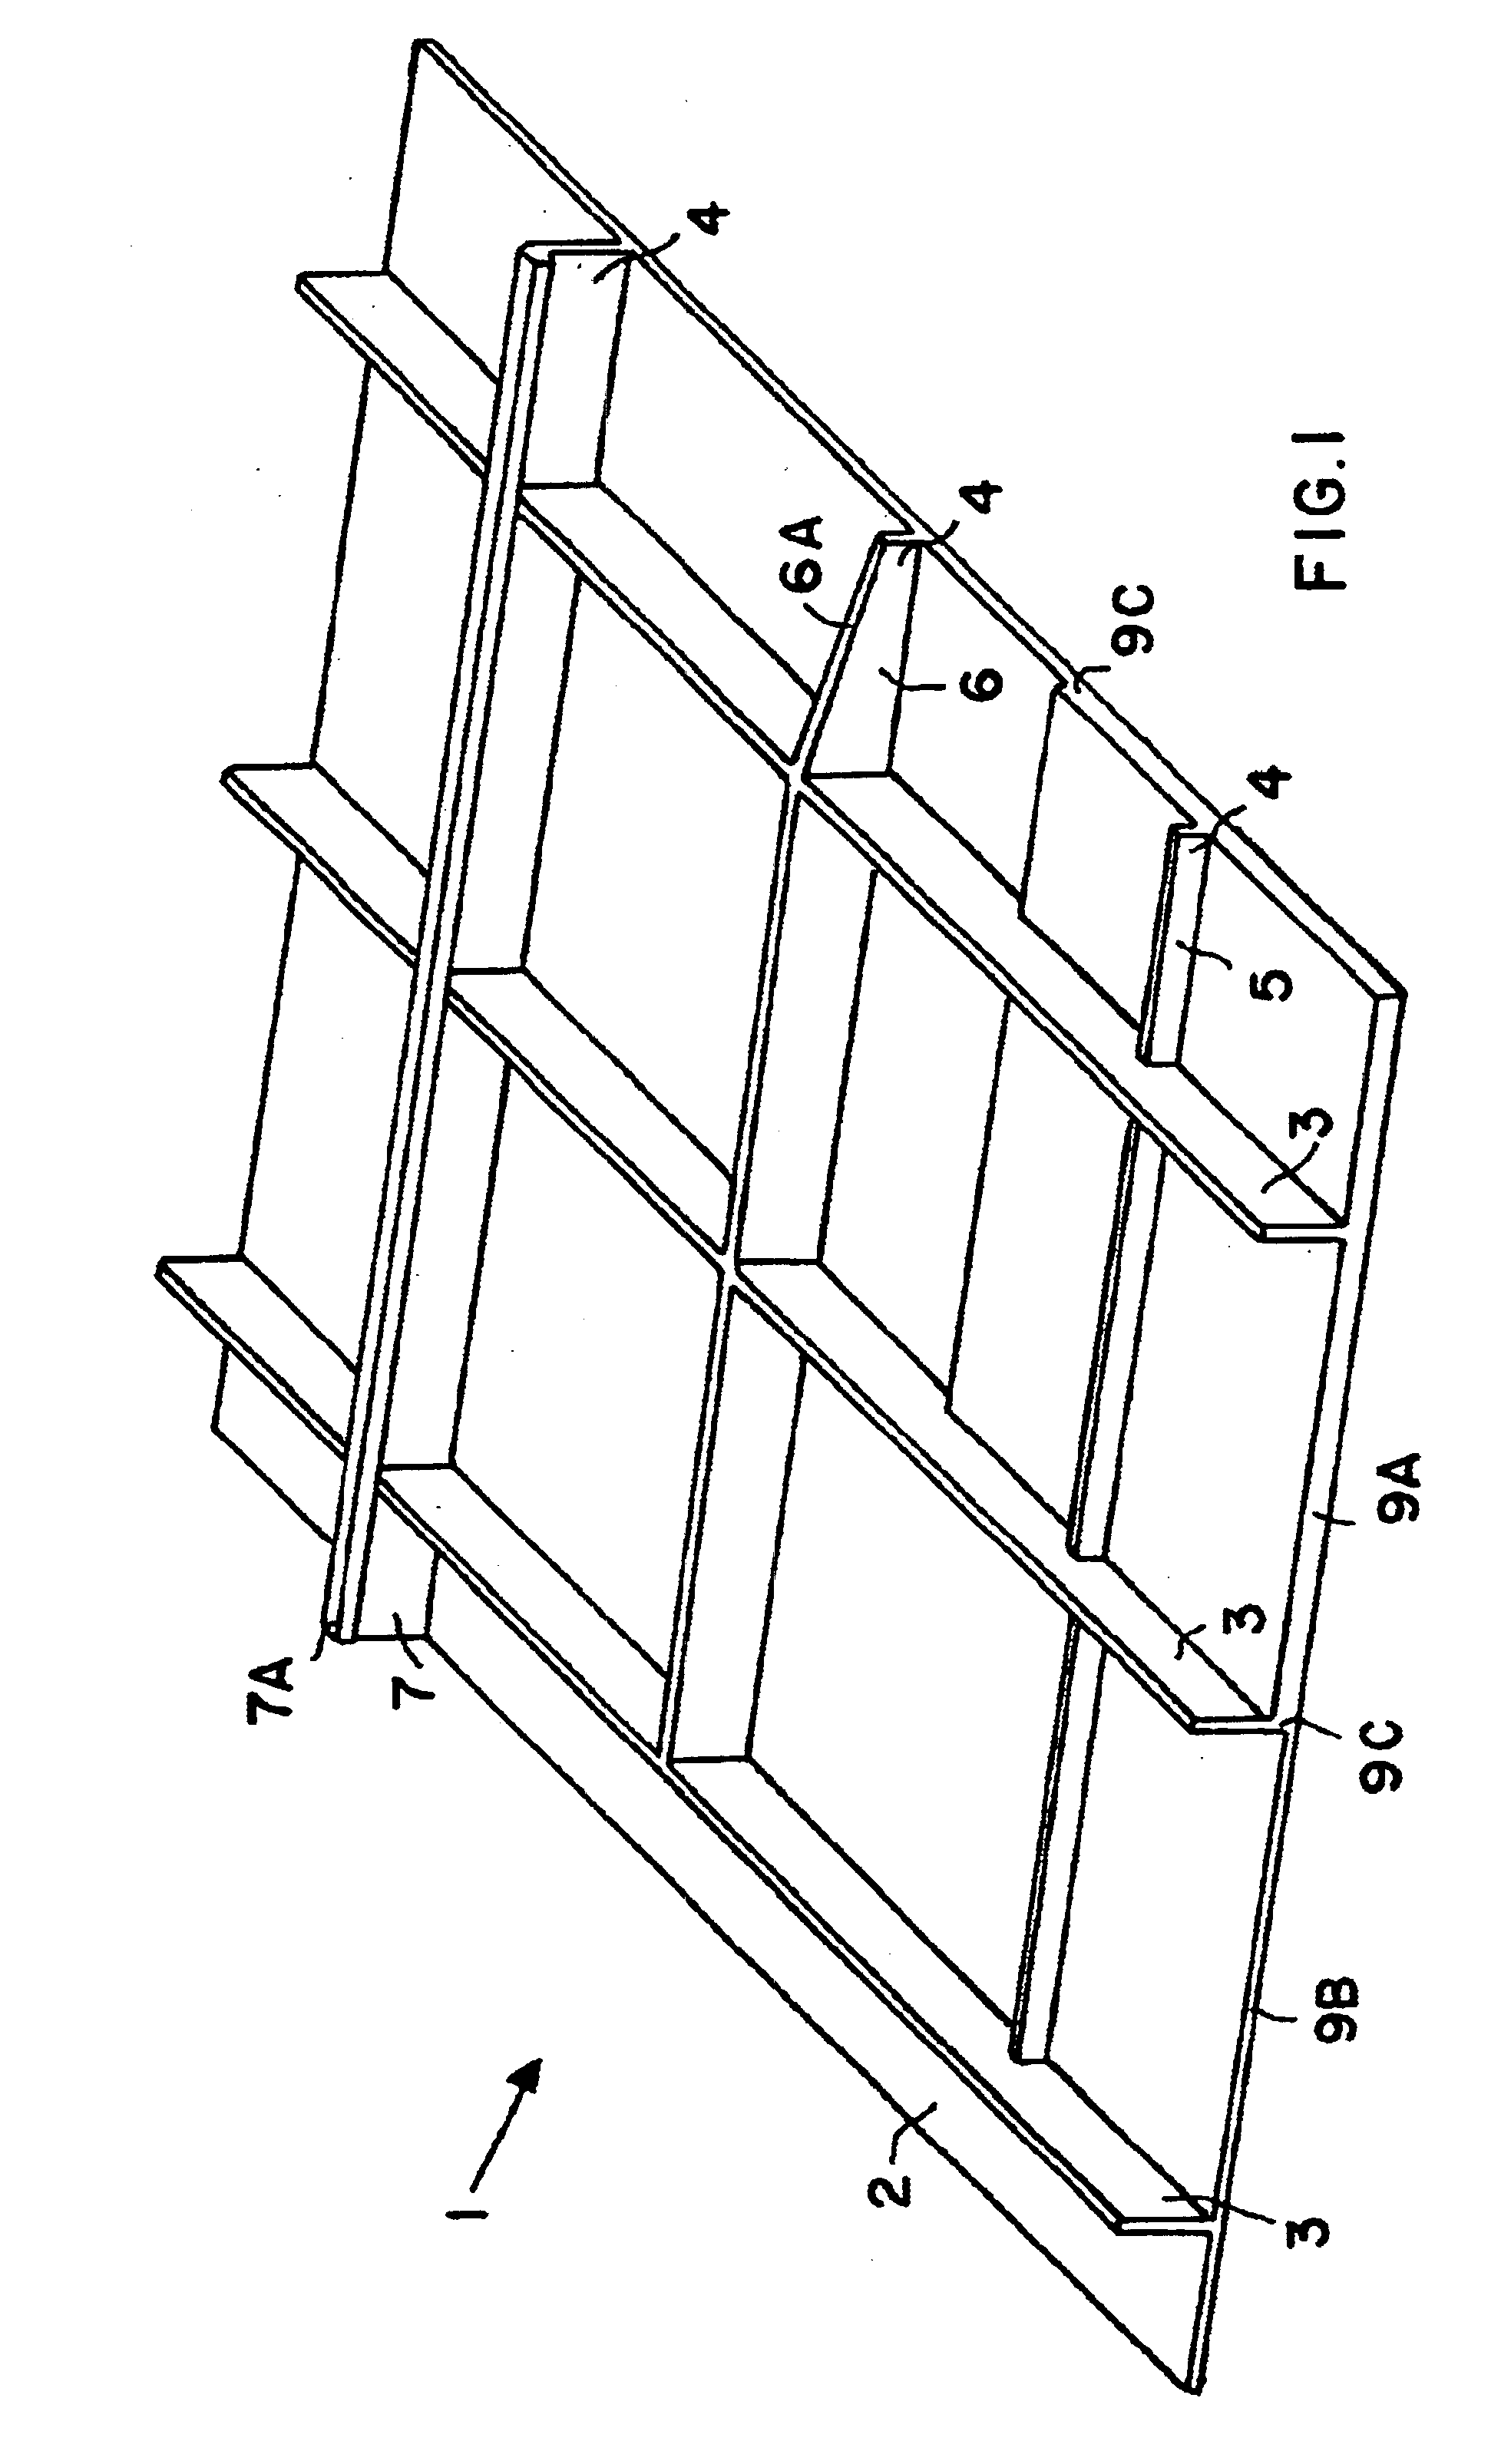 Integral structural shell component for an aircraft and method of manufacturing the same